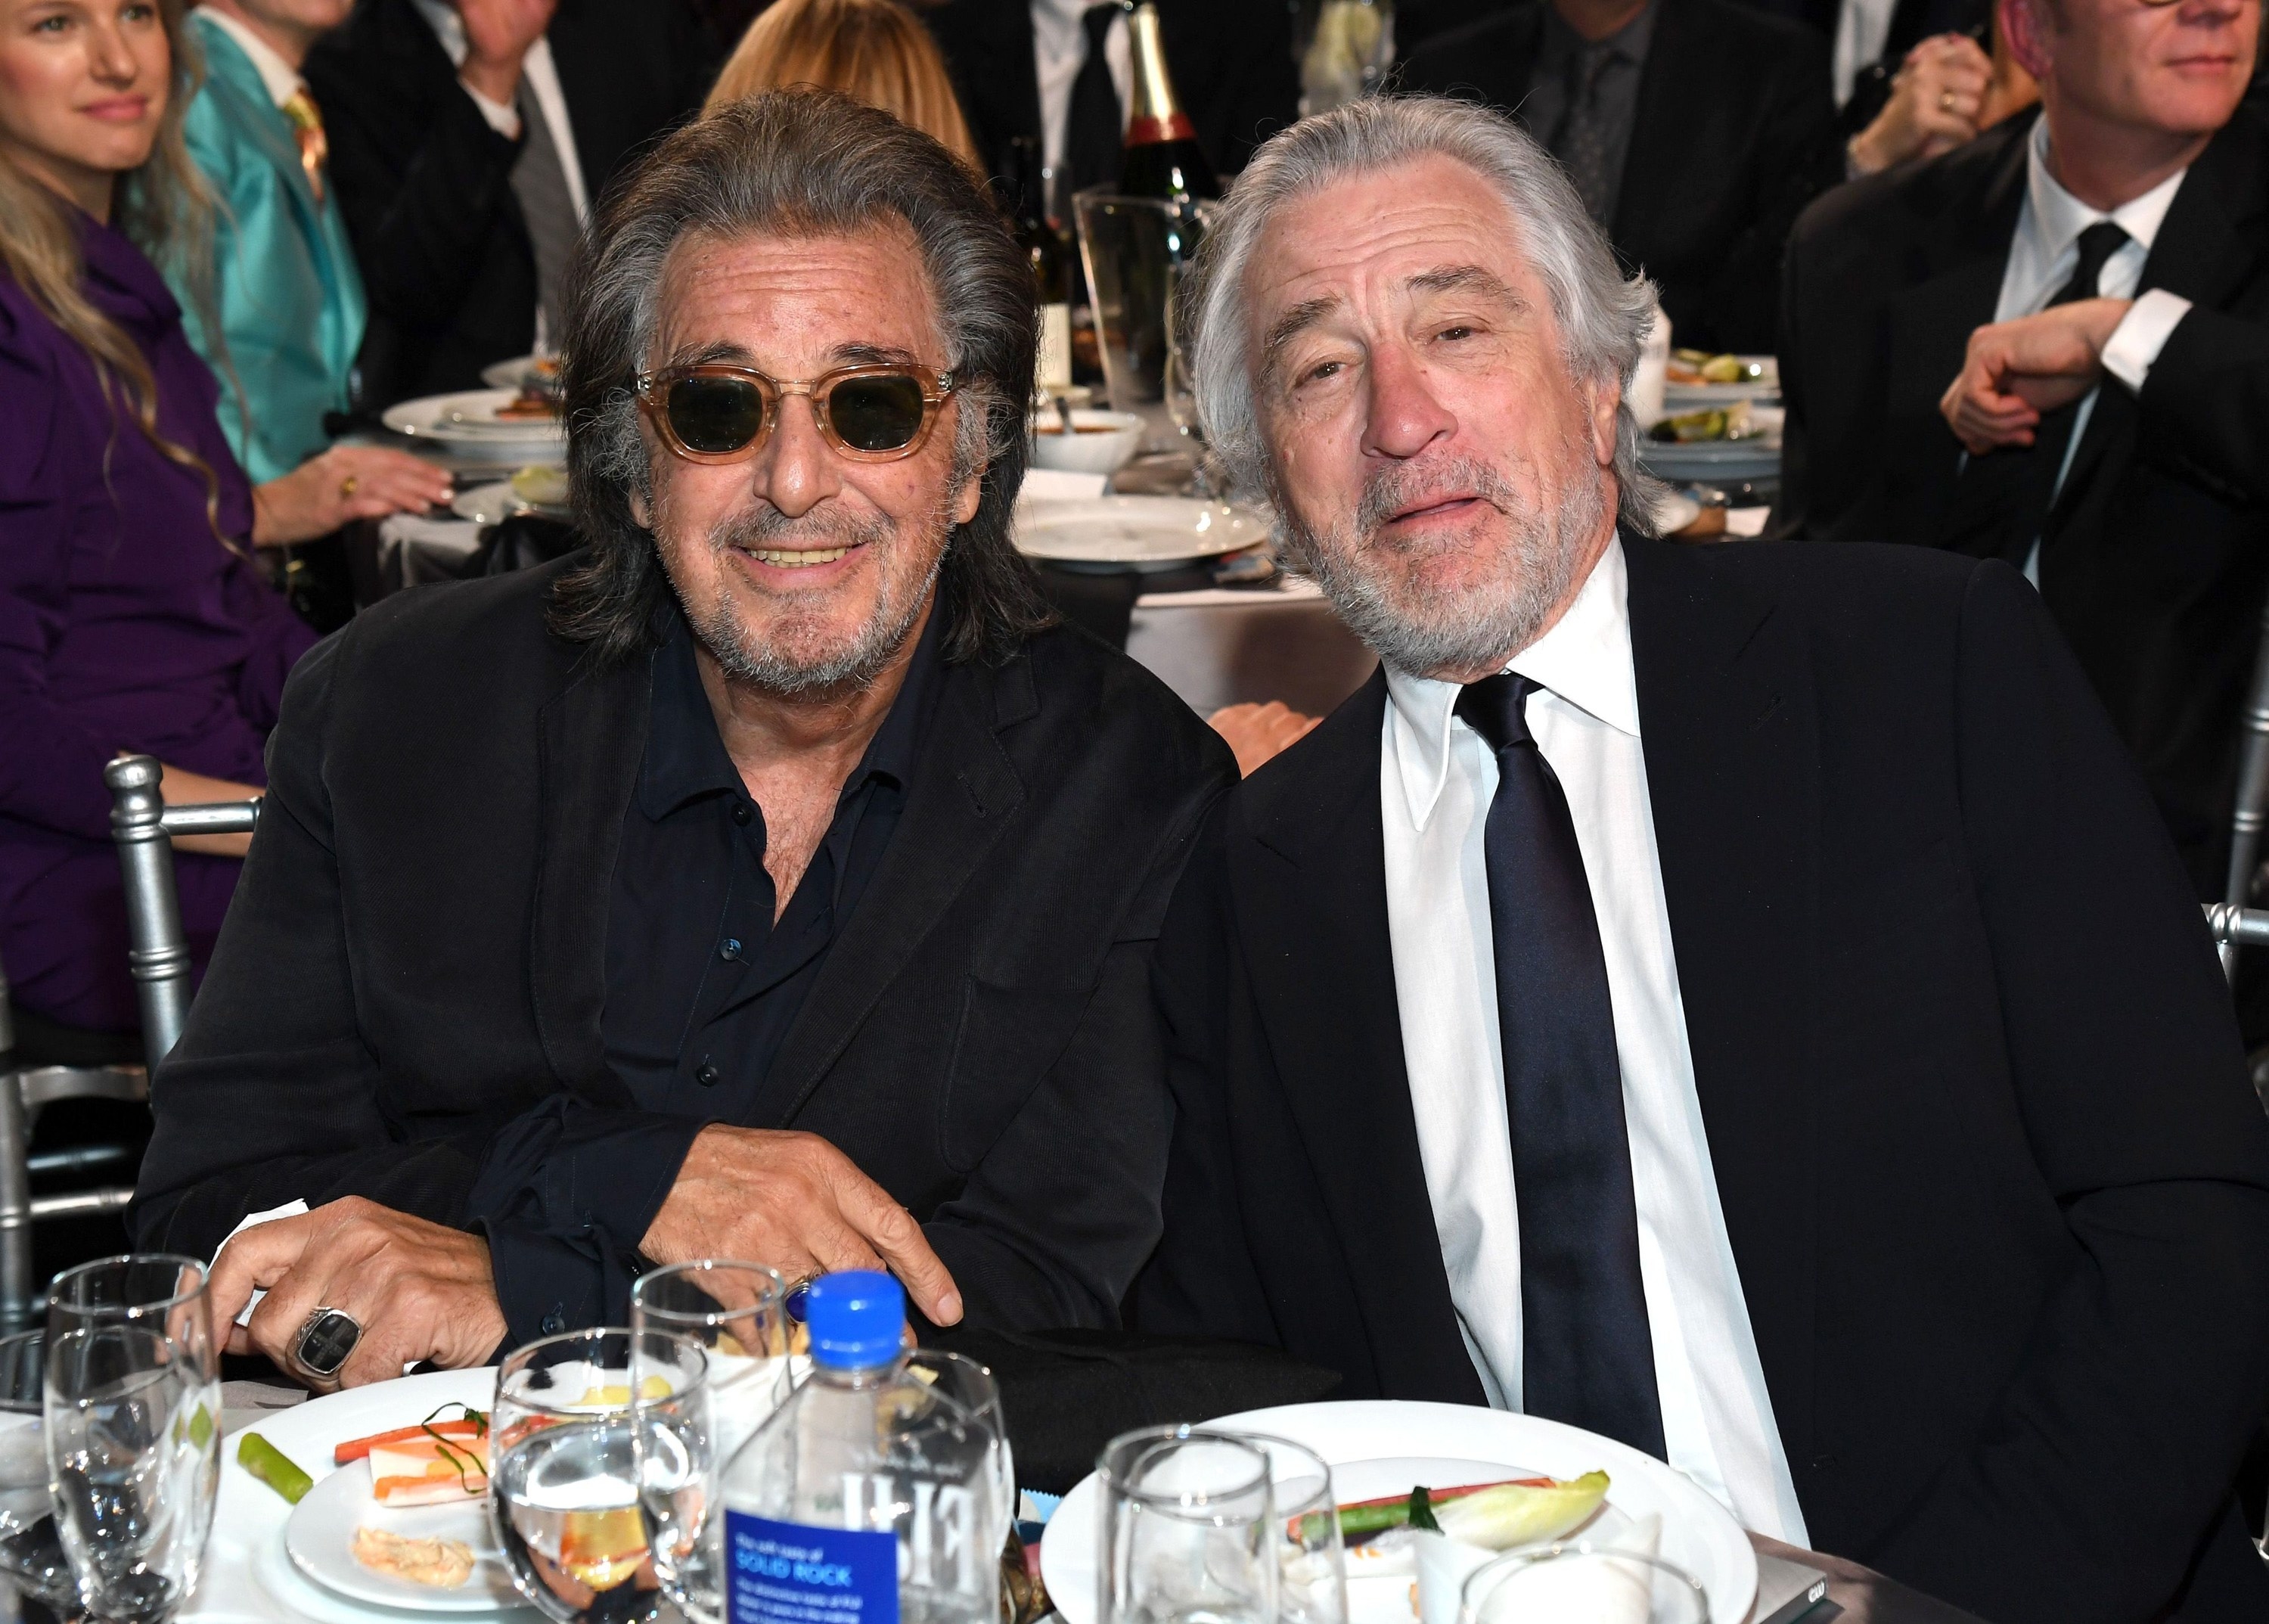 Pacino and De Niro sitting together and smiling